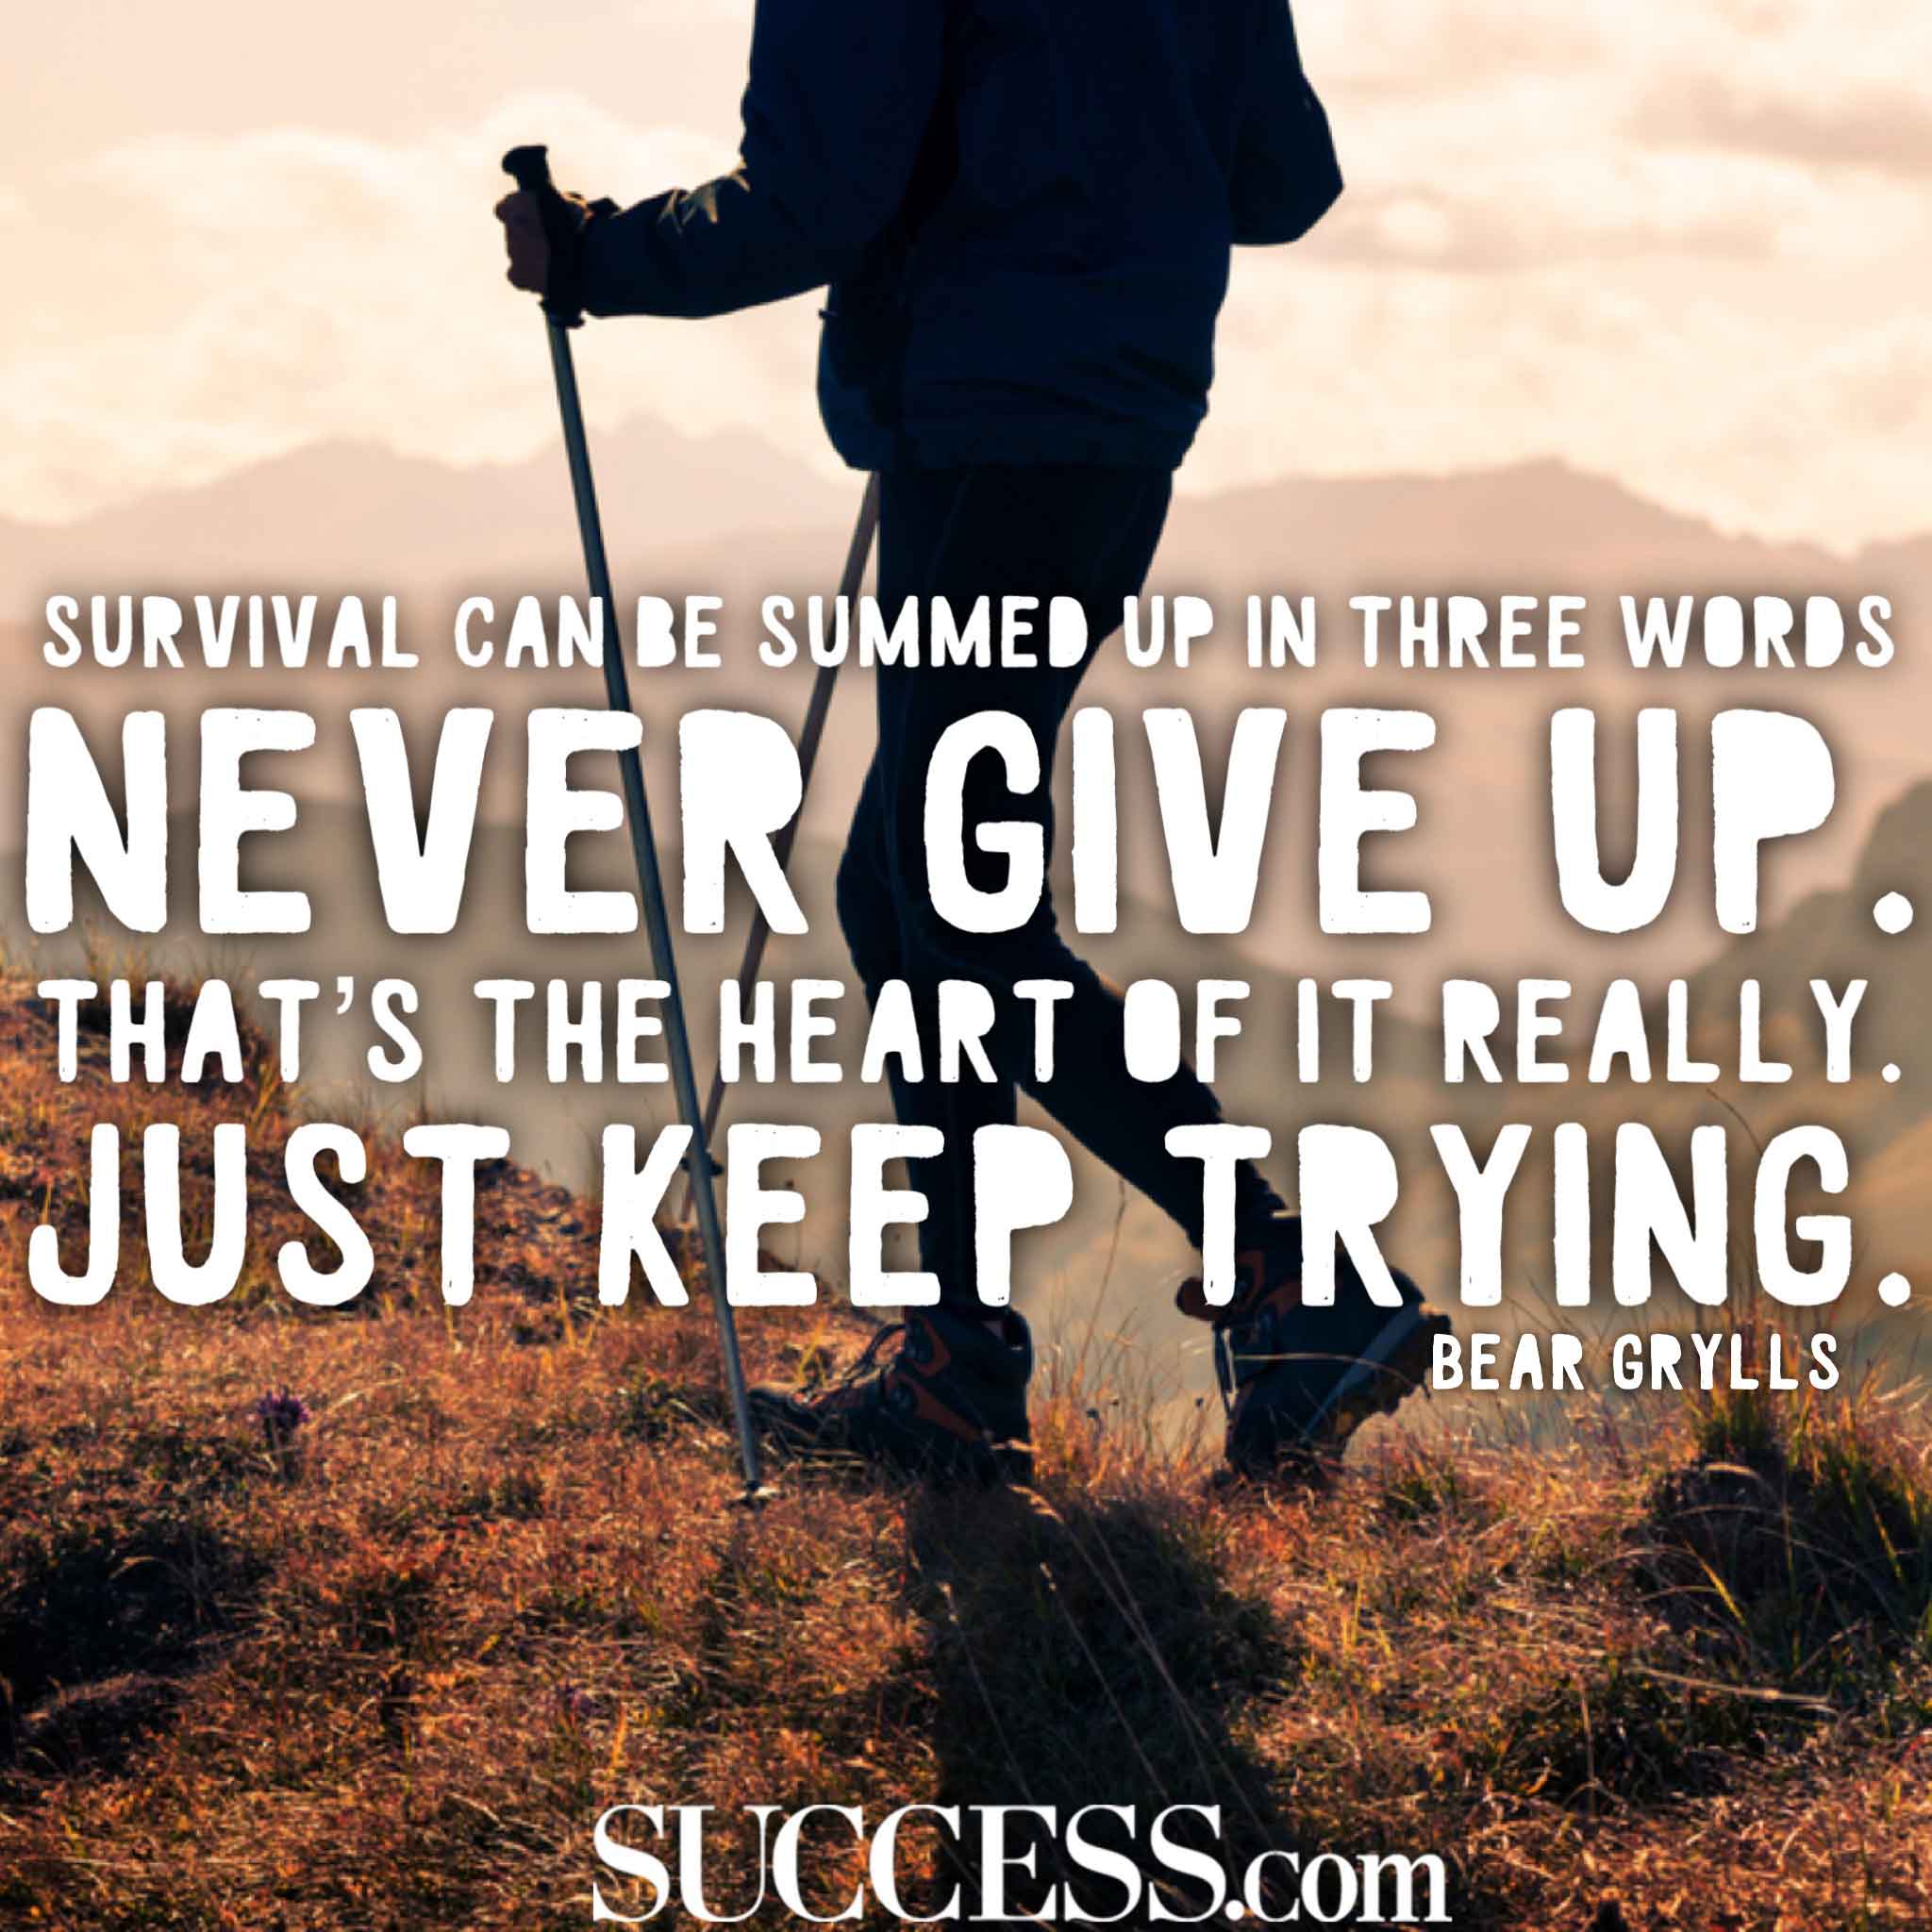 15 Inspiring Quotes About Never Giving Up - SUCCESS